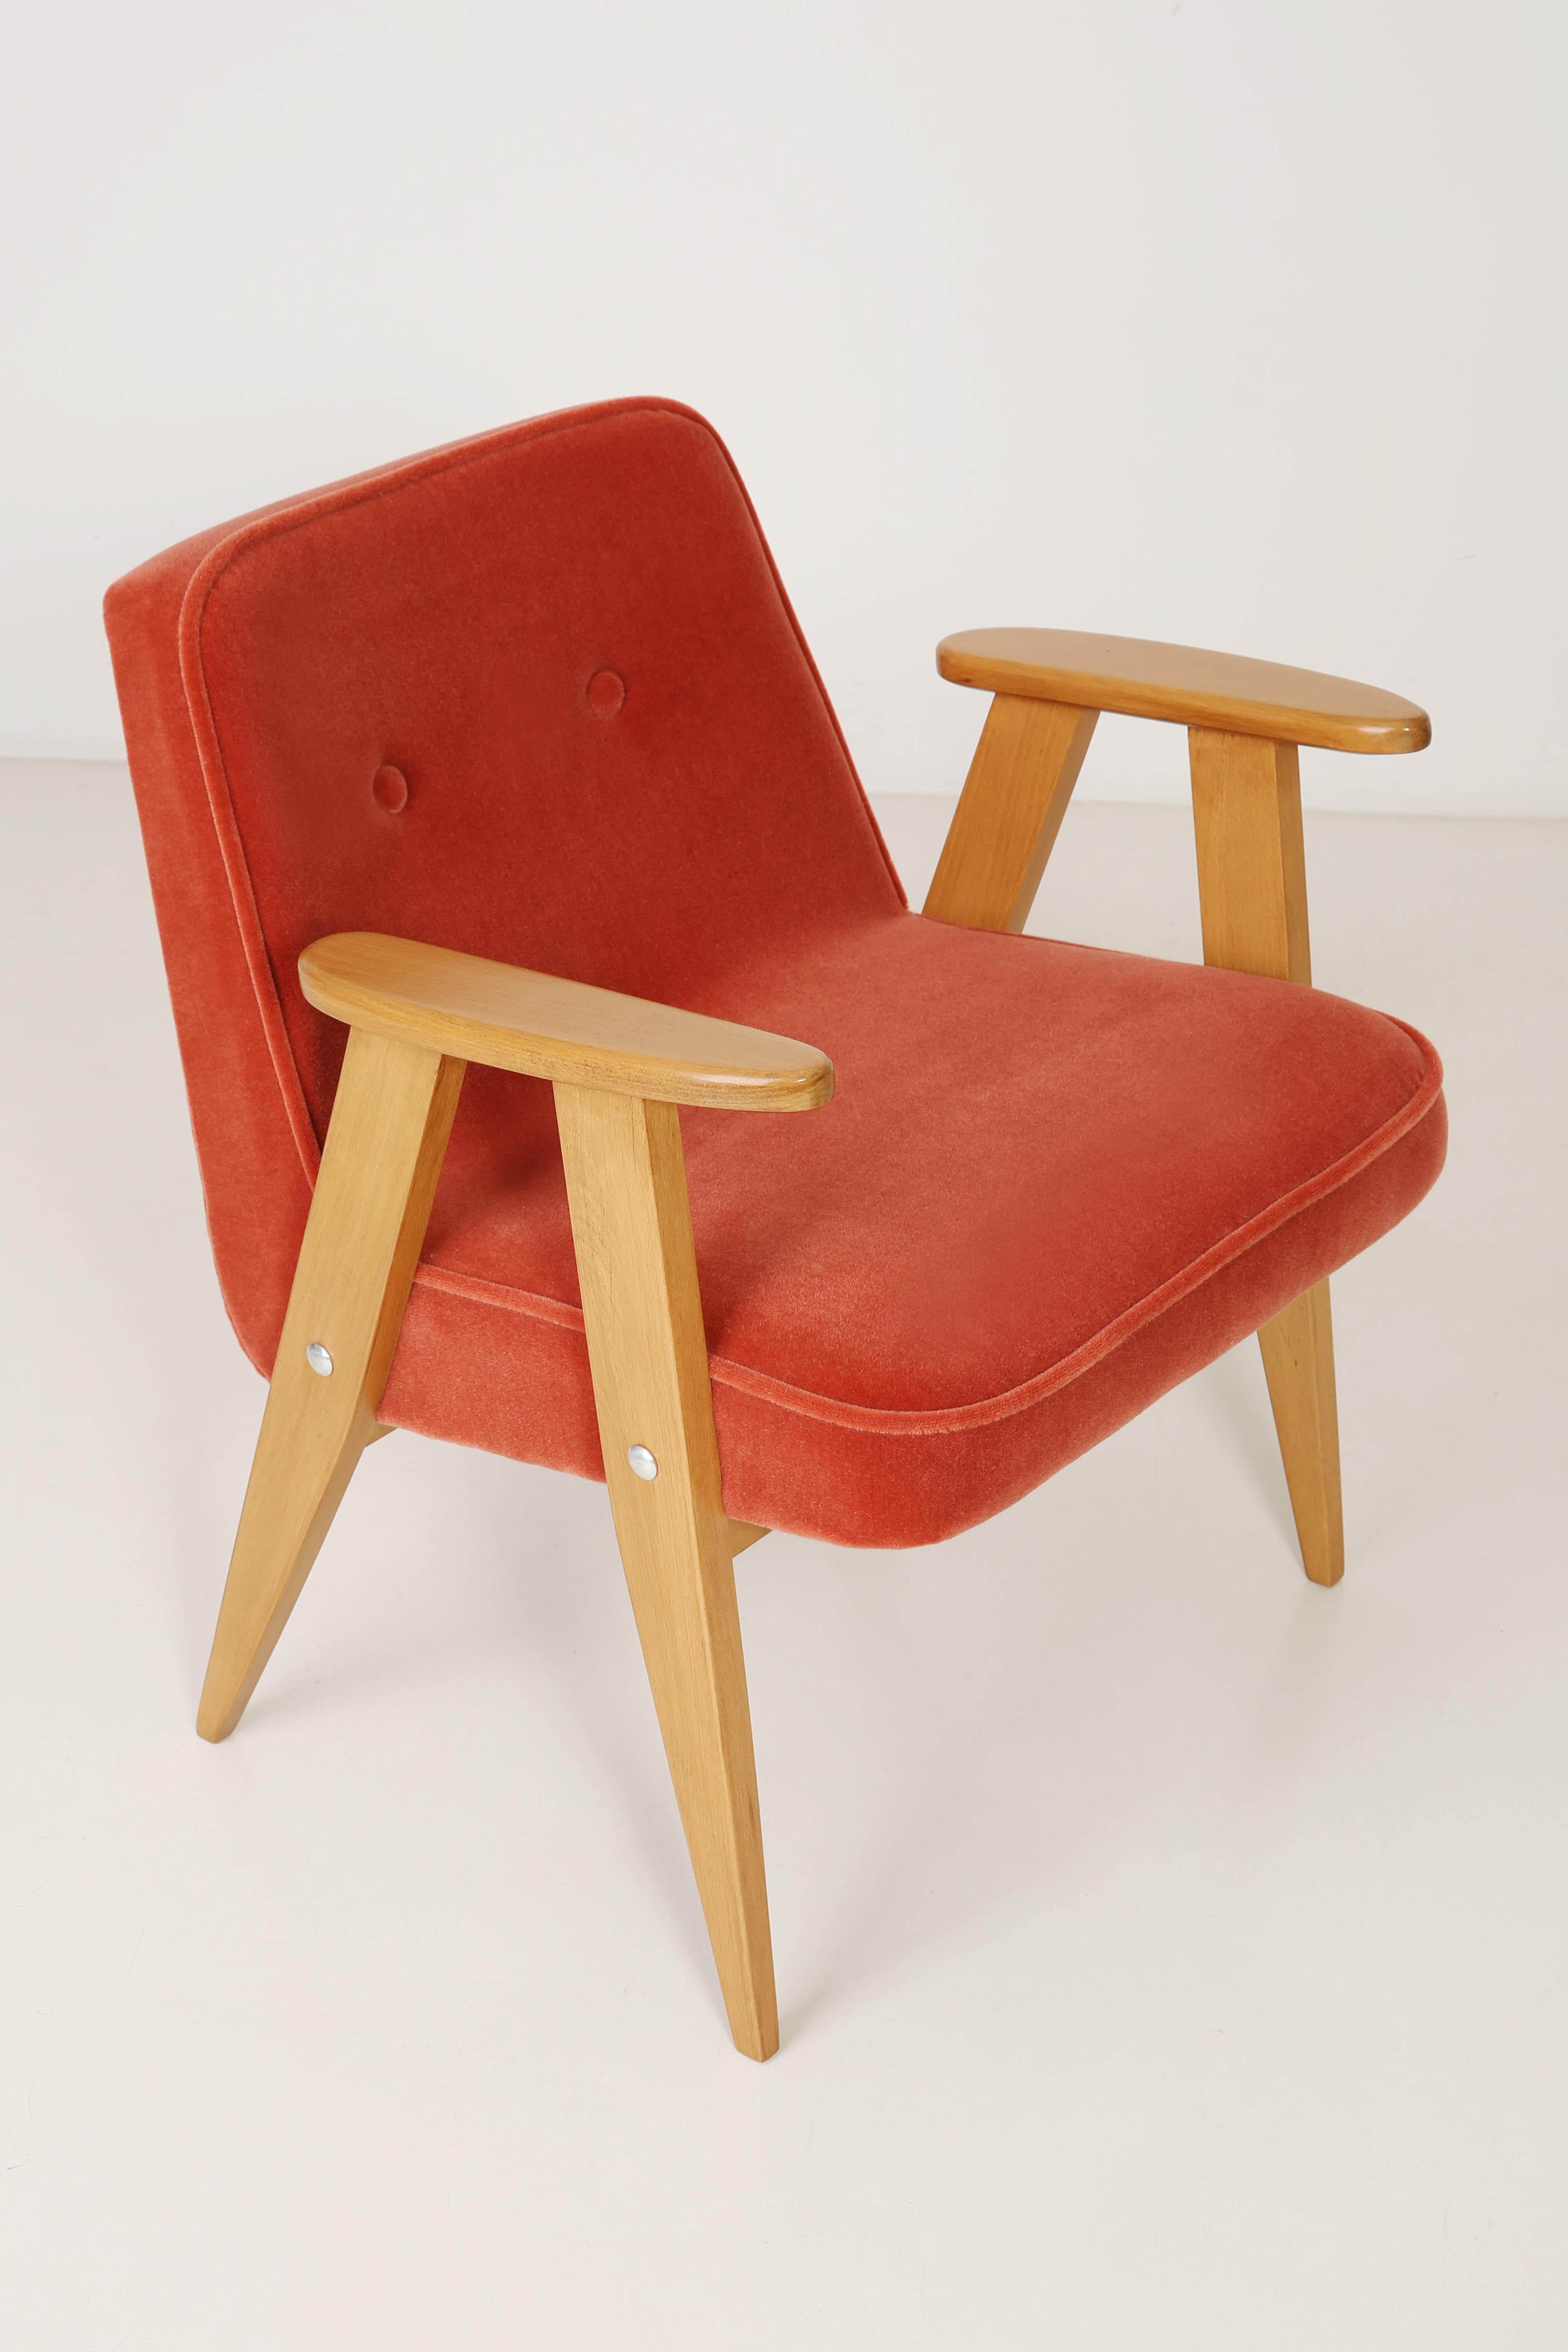 The 366 armchair is an icon of the polish design of the PRL period.

The famous armchair was designed in 1962 by the Polish interior designer and furniture designer Jozef Marian Chierowski. Produced in the Lower Silesian Furniture Factory in